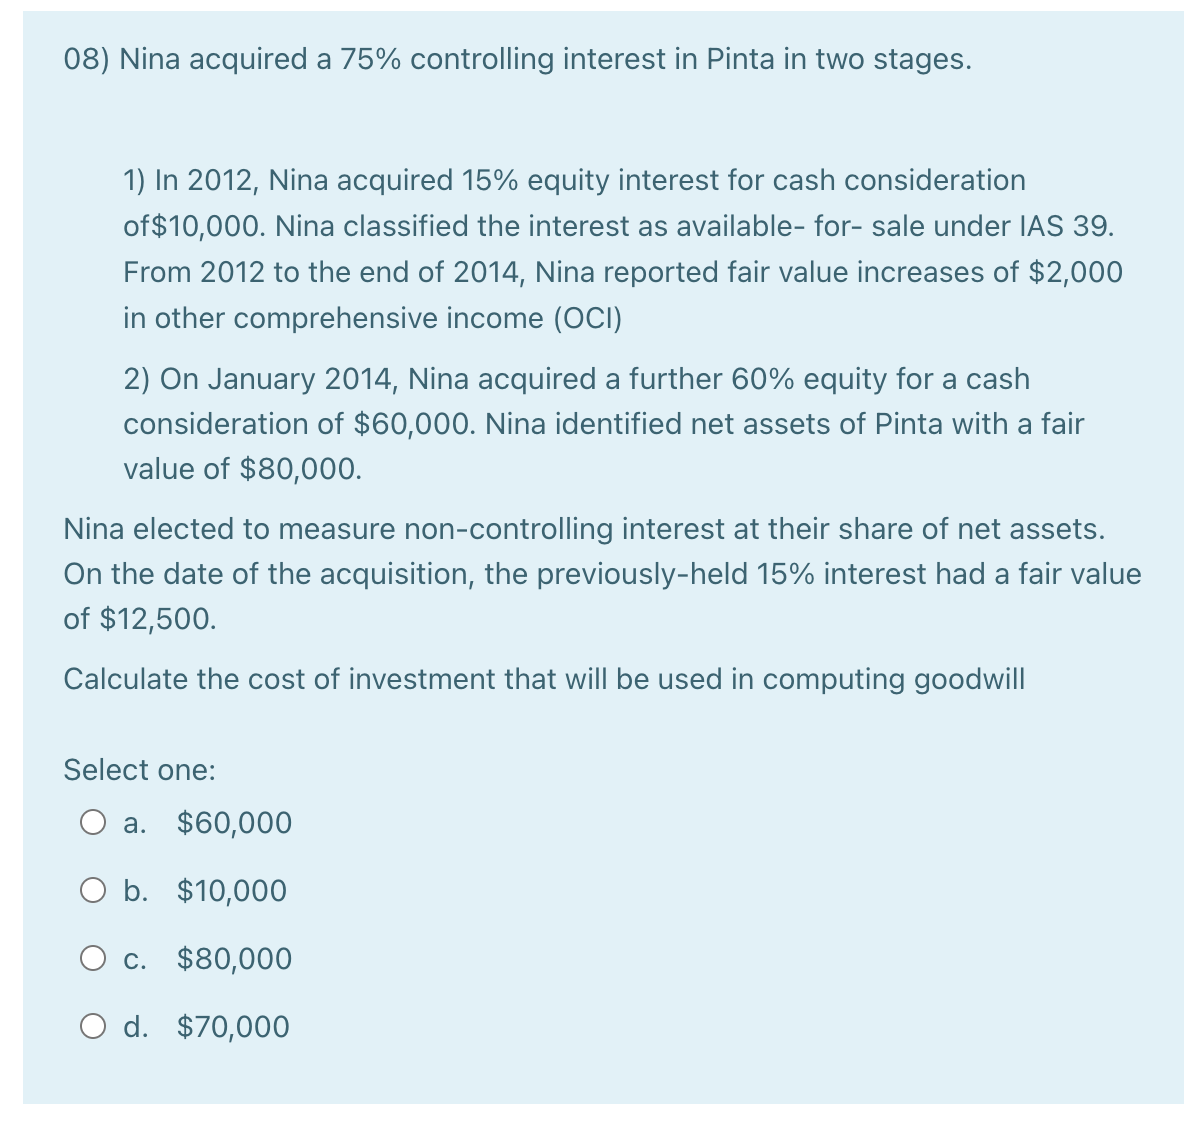 08) Nina acquired a 75% controlling interest in Pinta in two stages.
1) In 2012, Nina acquired 15% equity interest for cash consideration
of $10,000. Nina classified the interest as available for- sale under IAS 39.
From 2012 to the end of 2014, Nina reported fair value increases of $2,000
in other comprehensive income (OCI)
2) On January 2014, Nina acquired a further 60% equity for a cash
consideration of $60,000. Nina identified net assets of Pinta with a fair
value of $80,000.
Nina elected to measure non-controlling interest at their share of net assets.
On the date of the acquisition, the previously-held 15% interest had a fair value
of $12,500.
Calculate the cost of investment that will be used in computing goodwill
Select one:
a.
$60,000
O b. $10,000
O c. $80,000
O d. $70,000